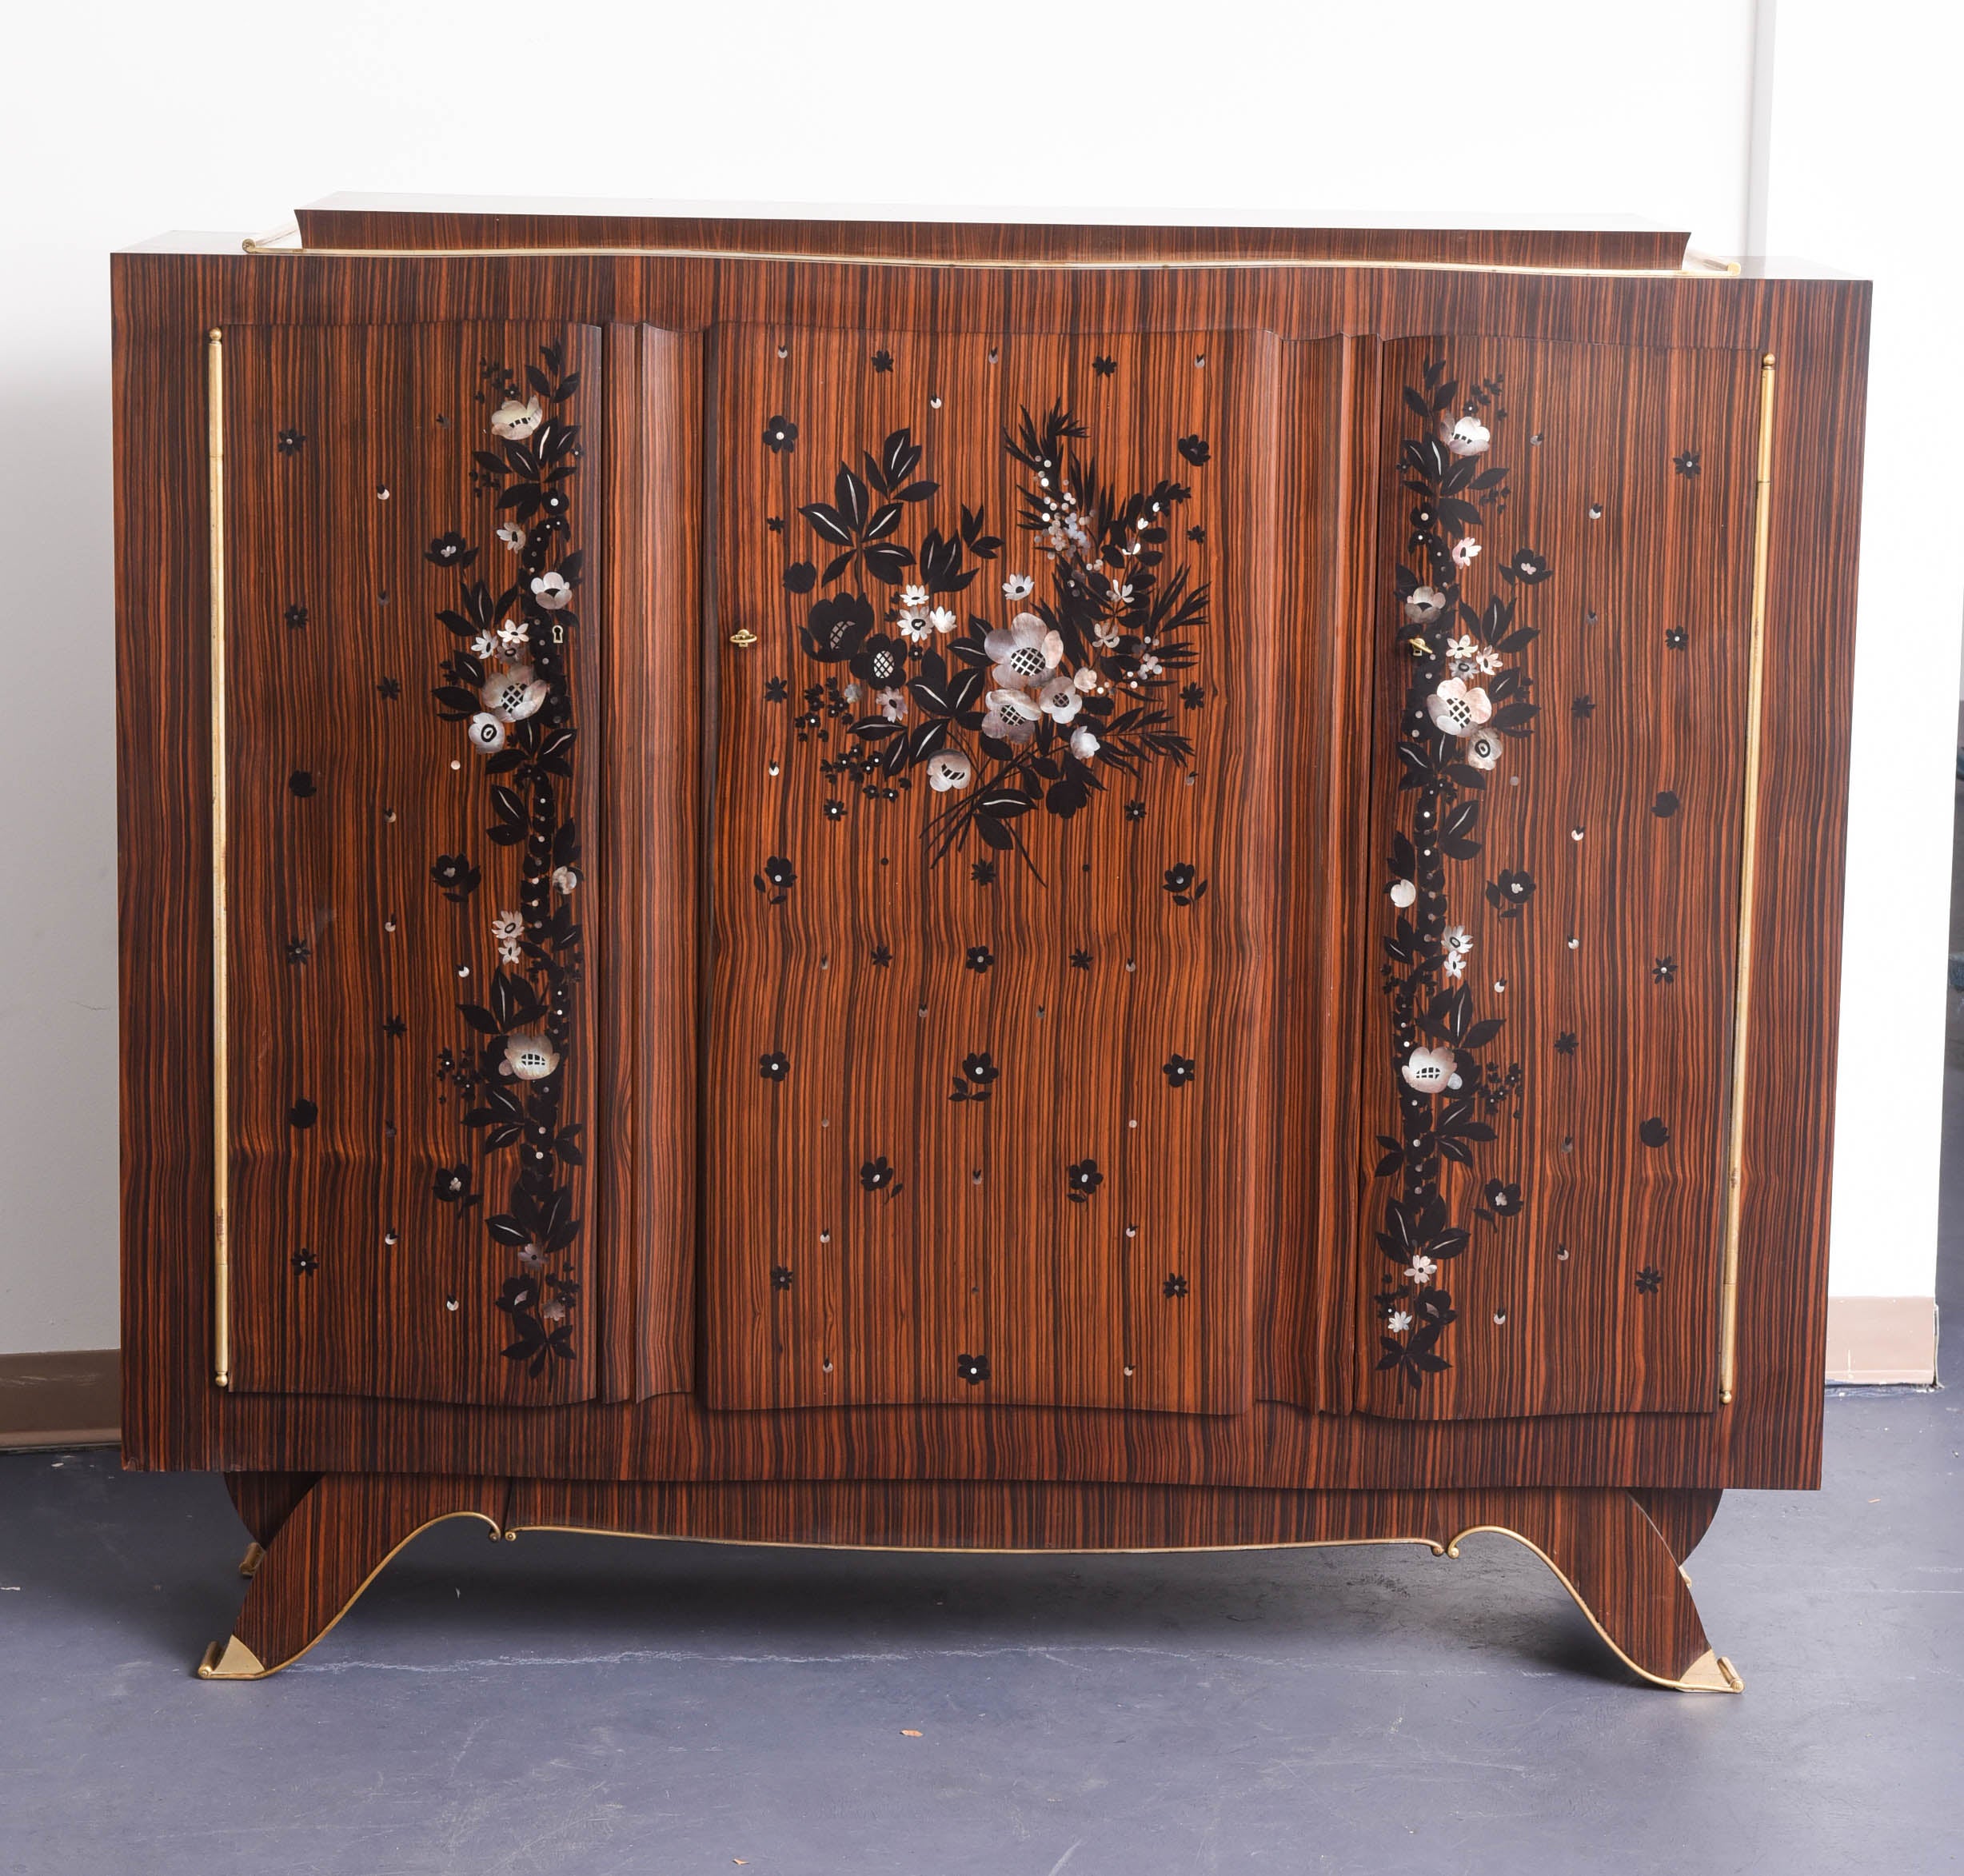 Rare and magnificent Art Deco Macassal inlaid cabinet. 
Front part inlaid with végétal design.
Slightly curved front doors.
Signed piece by Jules Leleu (1883-1961). 
Very exceptional master piece by the well known French designer Leleu.
the